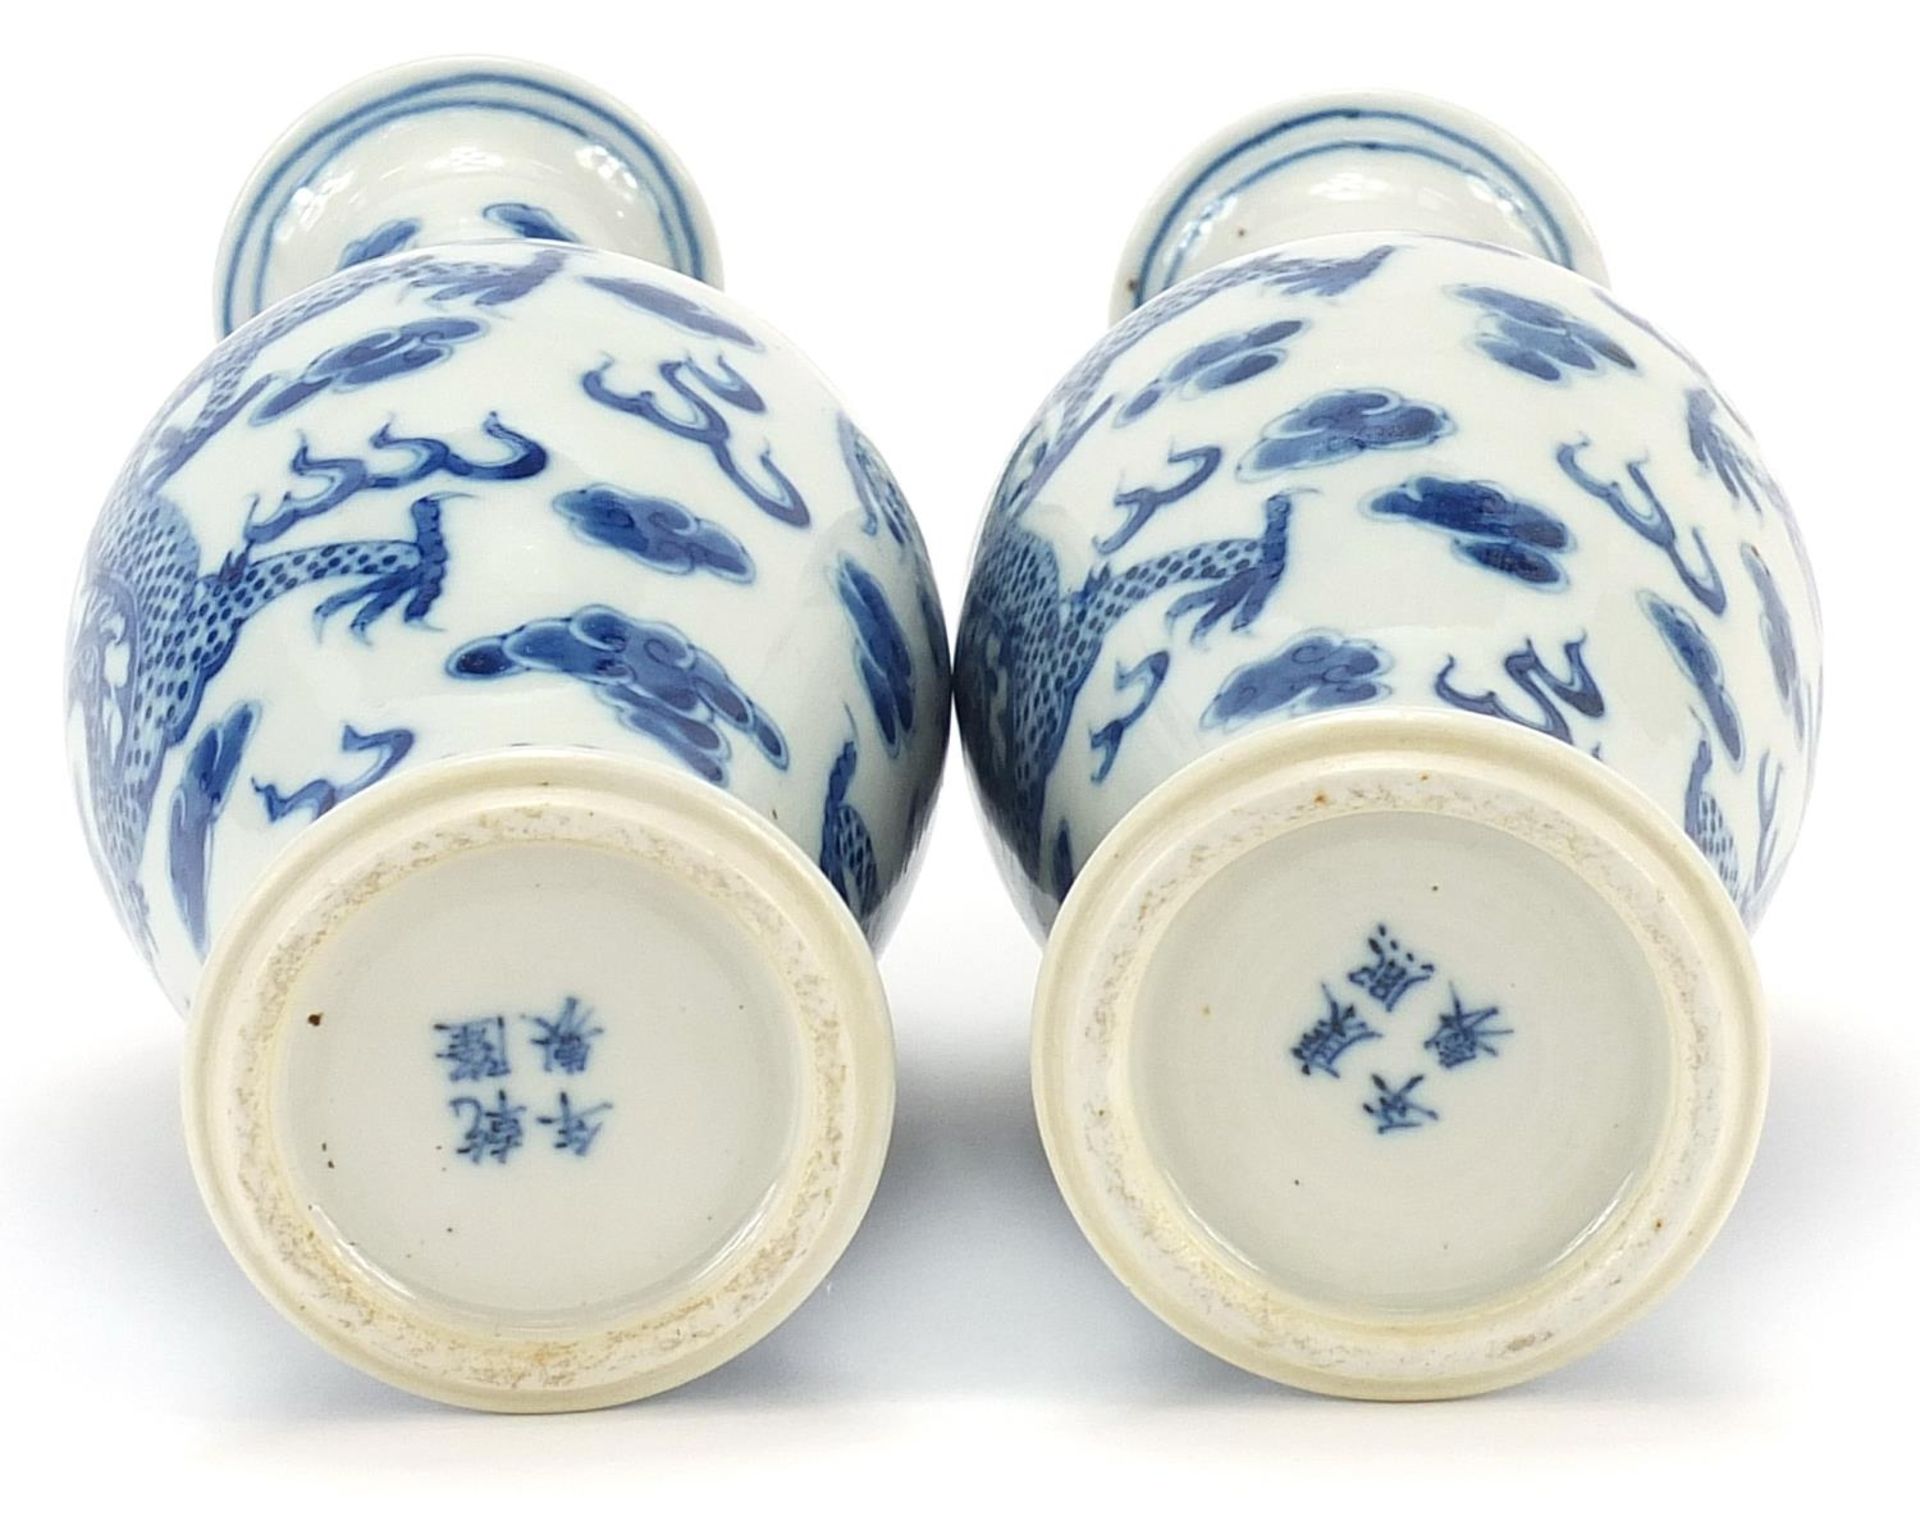 Pair of Chinese blue and white porcelain vases hand painted with dragons amongst clouds, four figure - Image 3 of 4